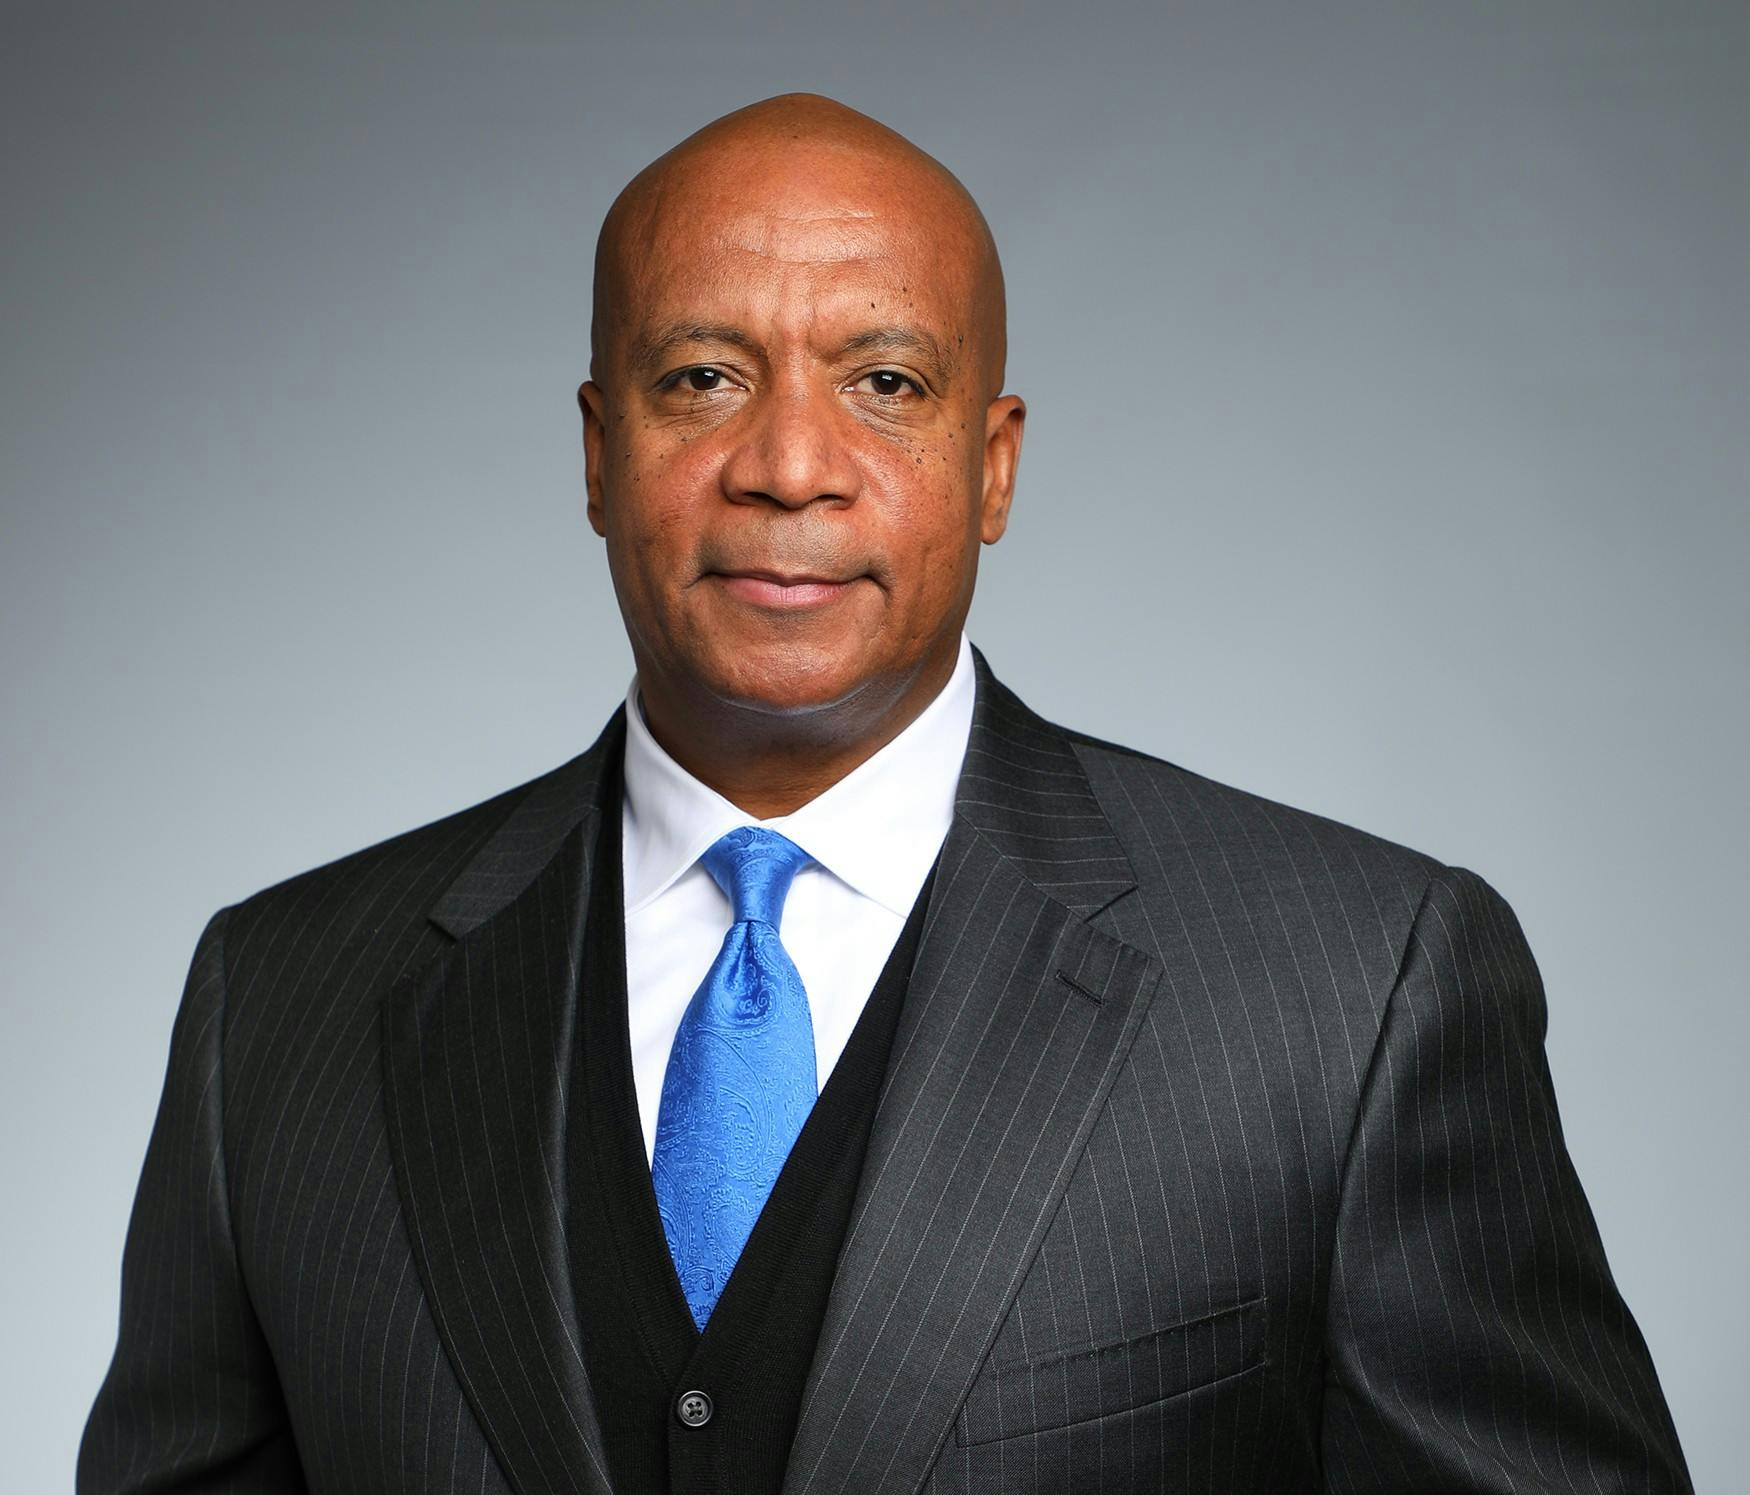 <p>Big Ten Commissioner Kevin Warren pictured in a headshot from the Big Ten Conference. Courtesy of the Big Ten Conference.</p>